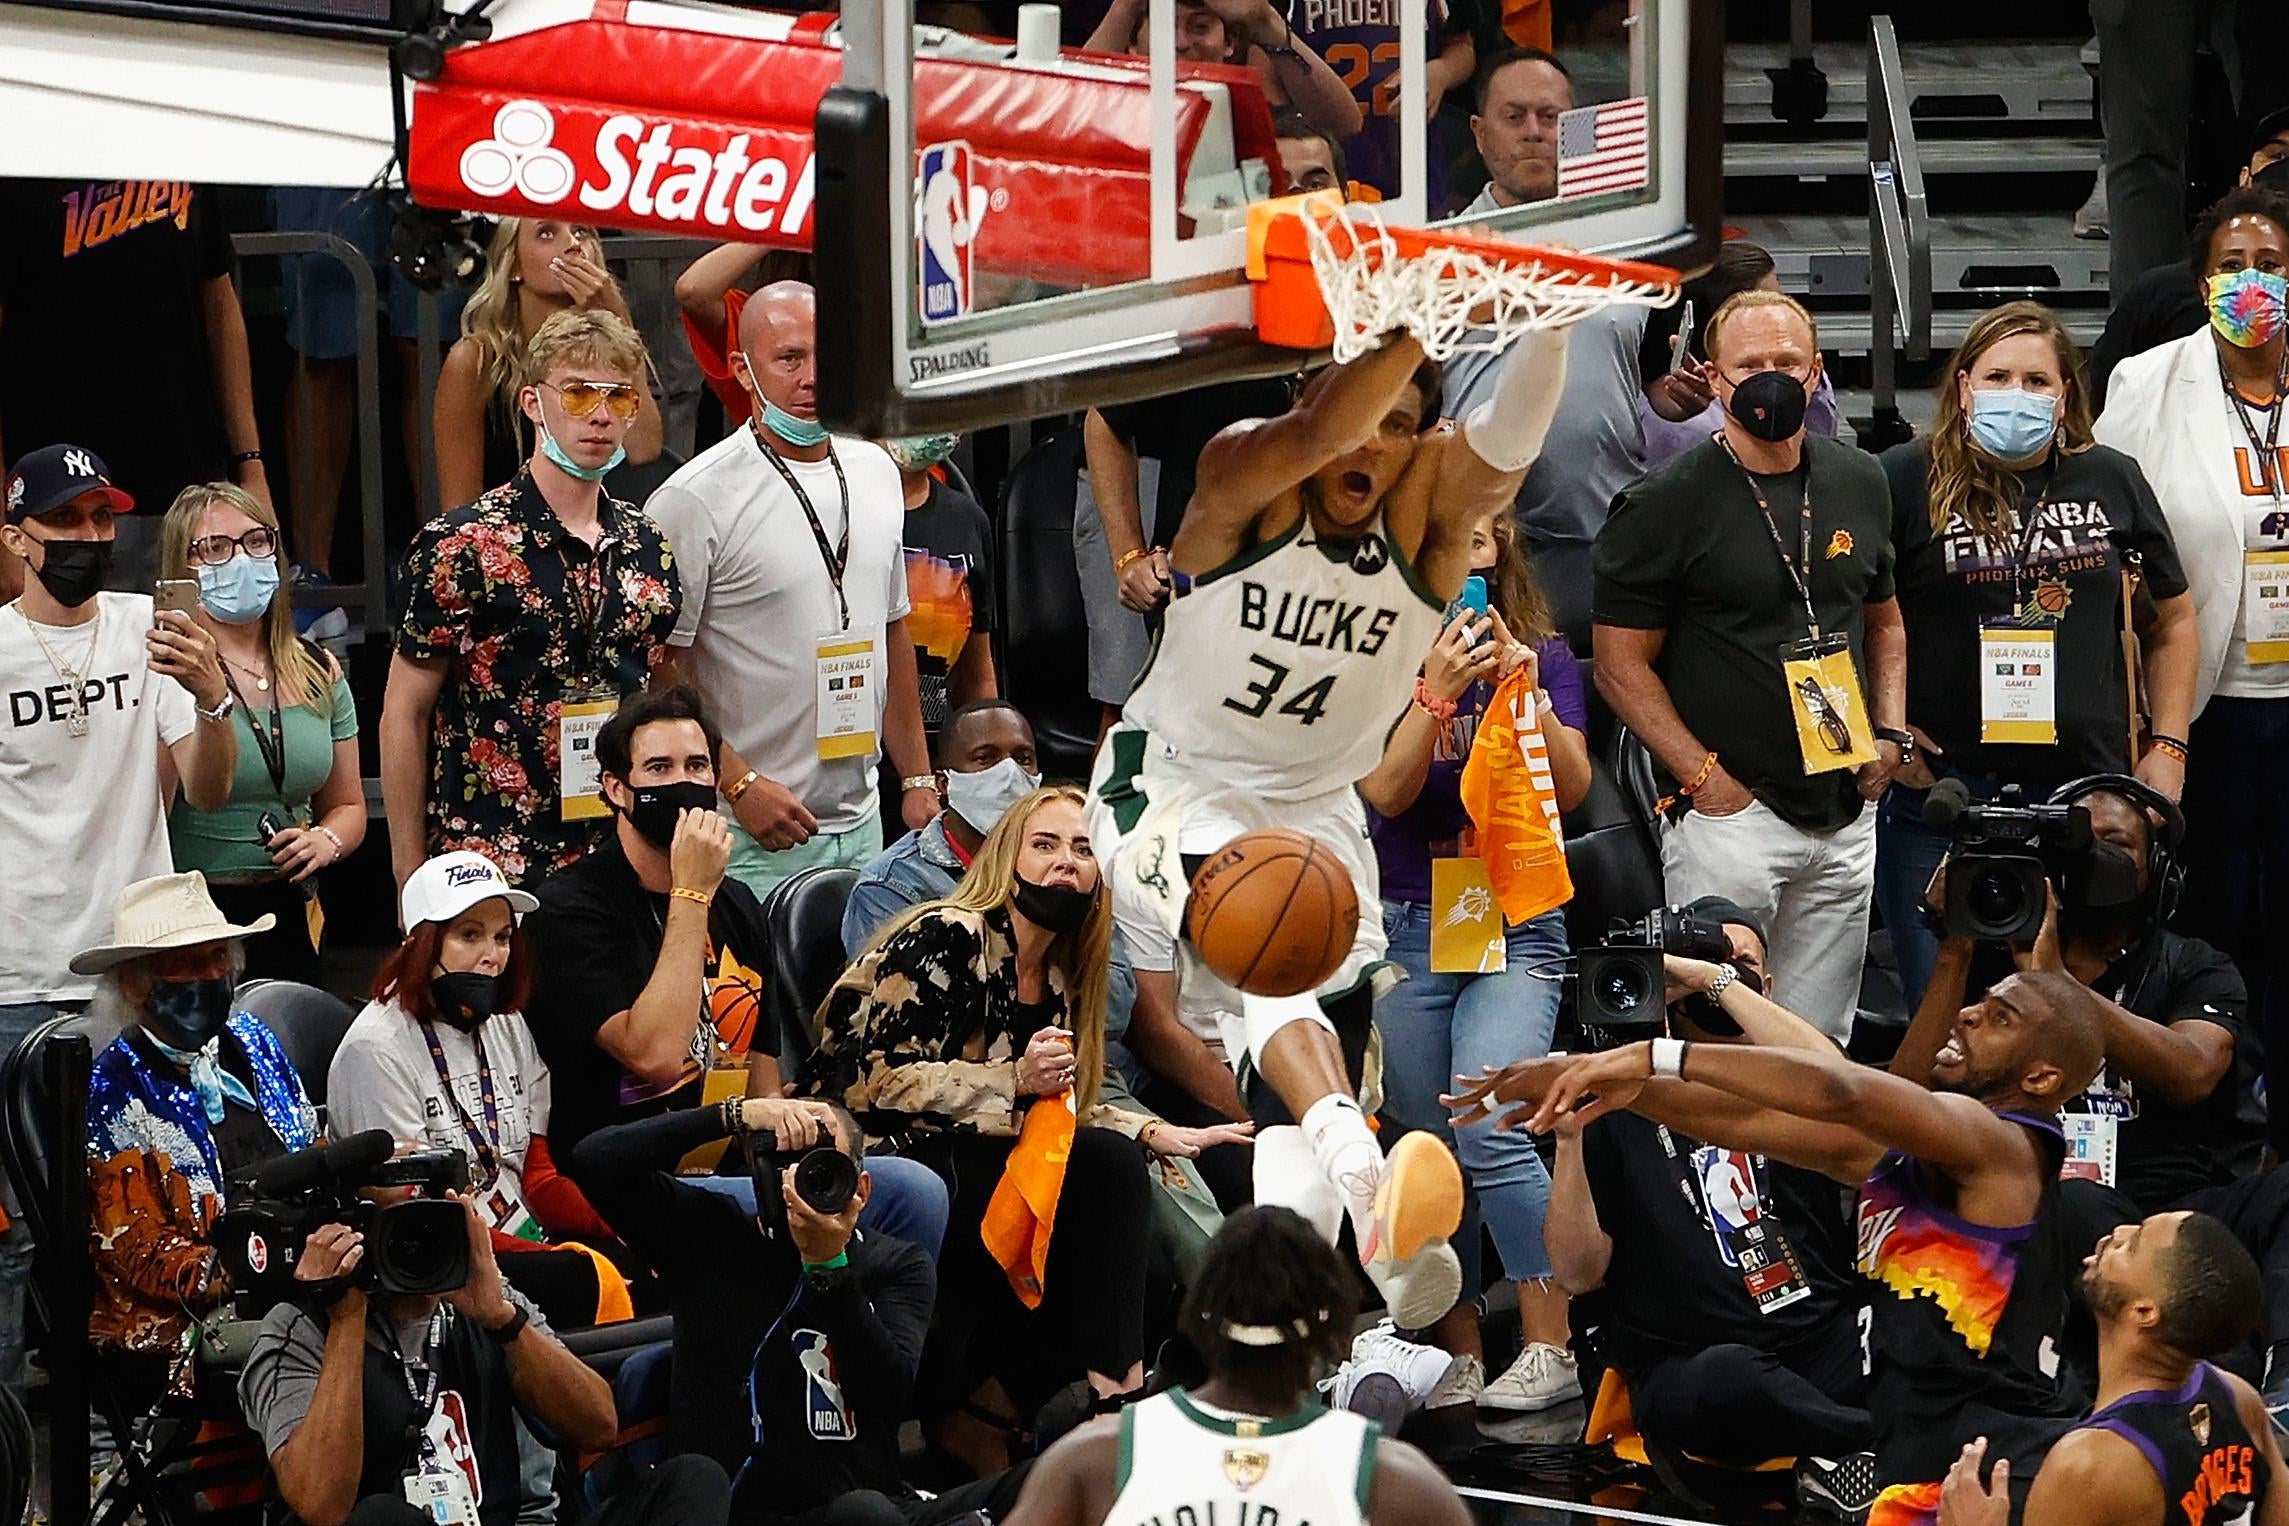 Giannis dunks on the side of the hoop with mouth agape and legs flying as Jrue Holiday, Chris Paul, Mikal Bridges, and Suns fans look on.